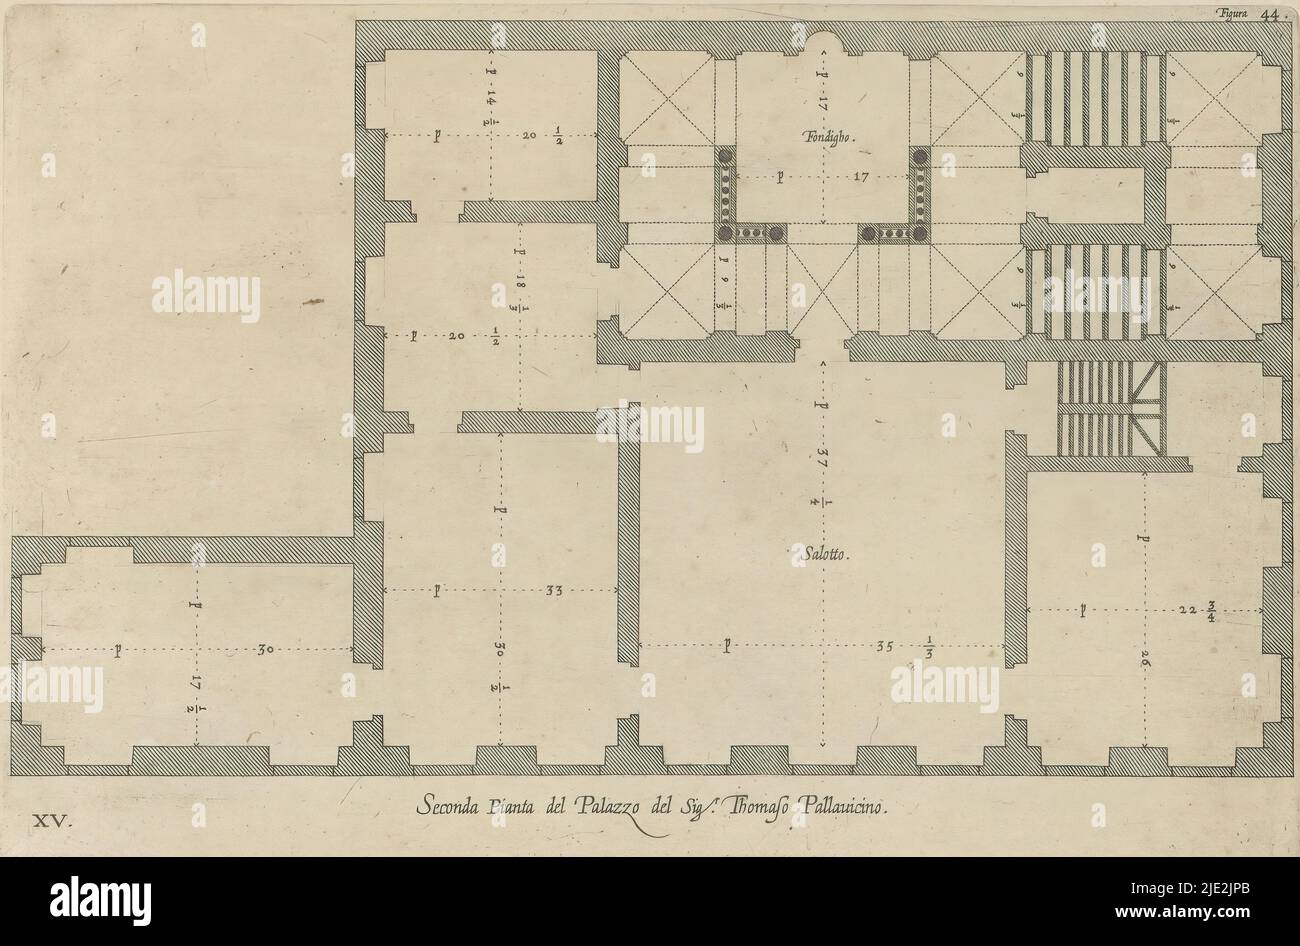 Map of the second floor of the Palazzo dell'Acquedotto de Ferrari Galliera at Genoa, Seconda pianta del Palazzo del sigr. Thomaso Pallavicino (title on object), This print is part of an album., print maker: Nicolaes Ryckmans, publisher: Peter Paul Rubens, Spaanse kroon, Antwerp, 1622, paper, engraving, height 218 mm × width 329 mm, height 583 mm × width 435 mm Stock Photo